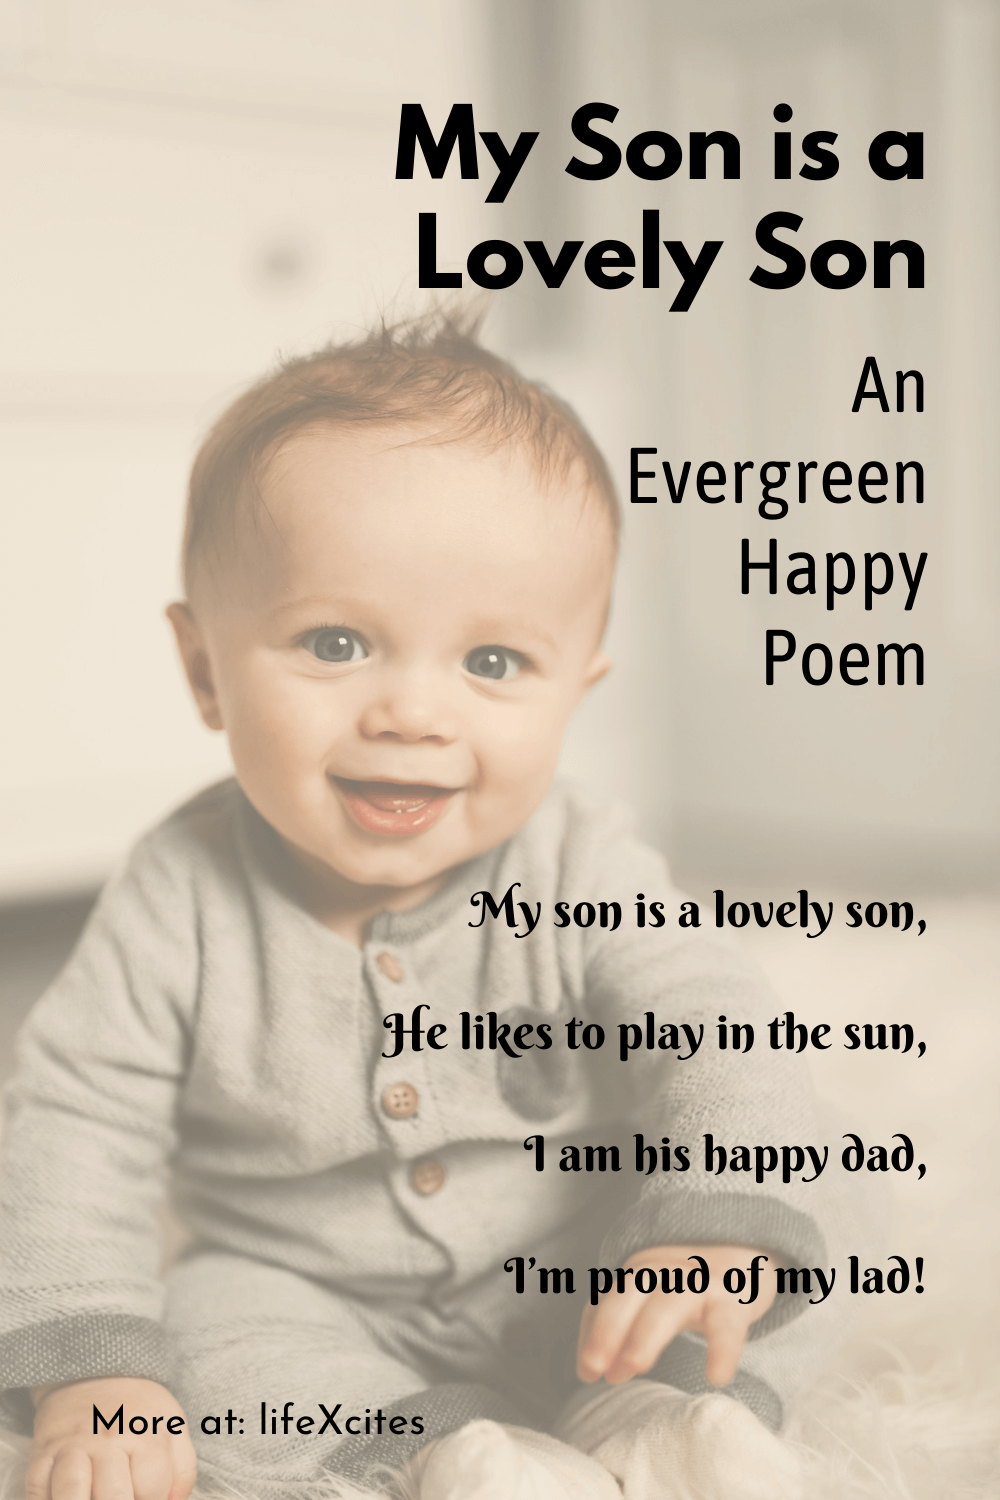 My Son is a Lovely Son An Evergreen Happy Poem